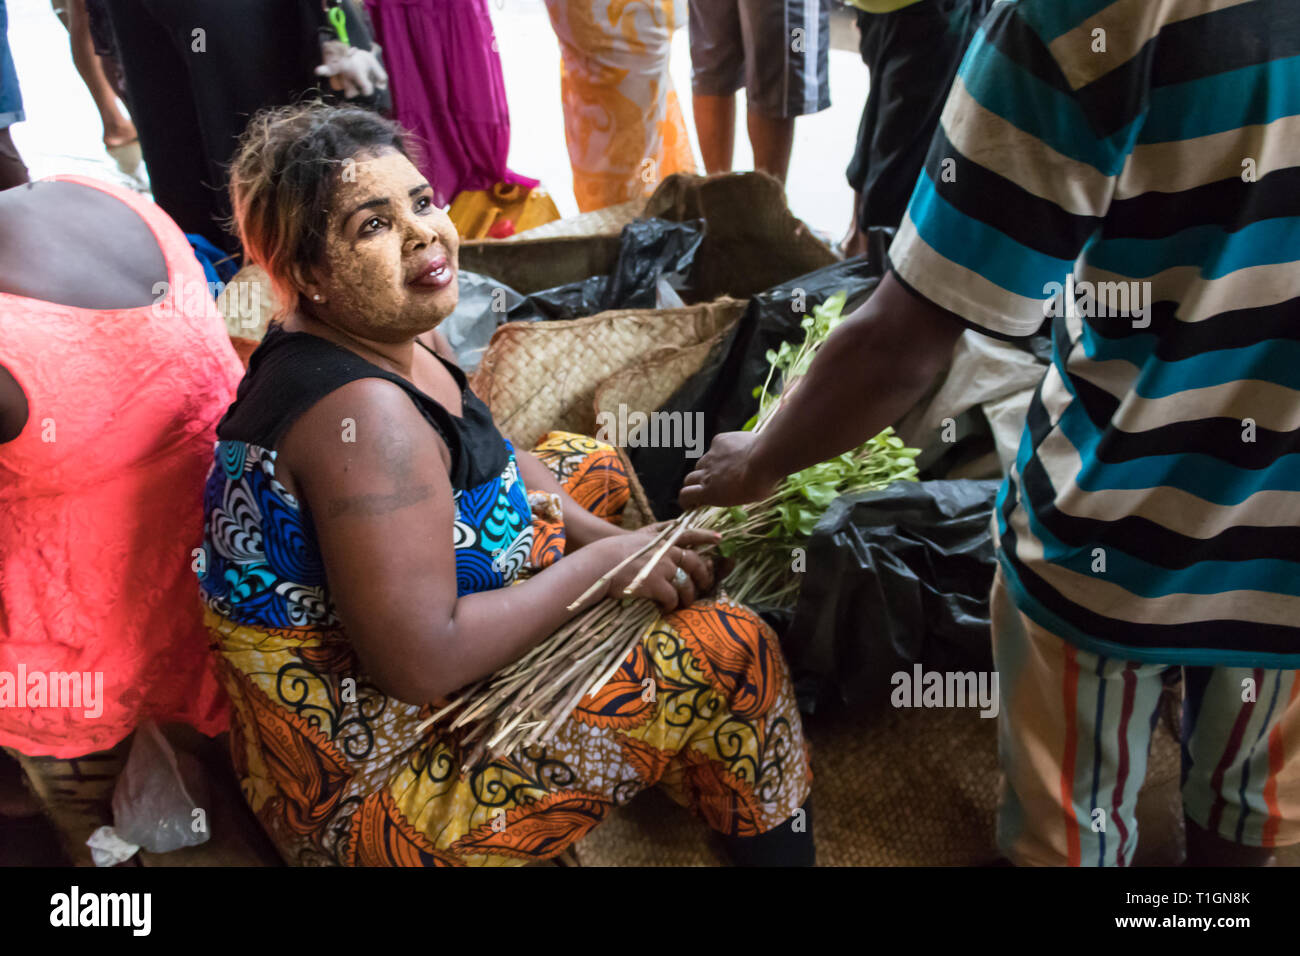 Nosy Be, Madagascar - January 17th, 2019: A woman selling khat in the market of Nosy Be, Madagascar. Stock Photo